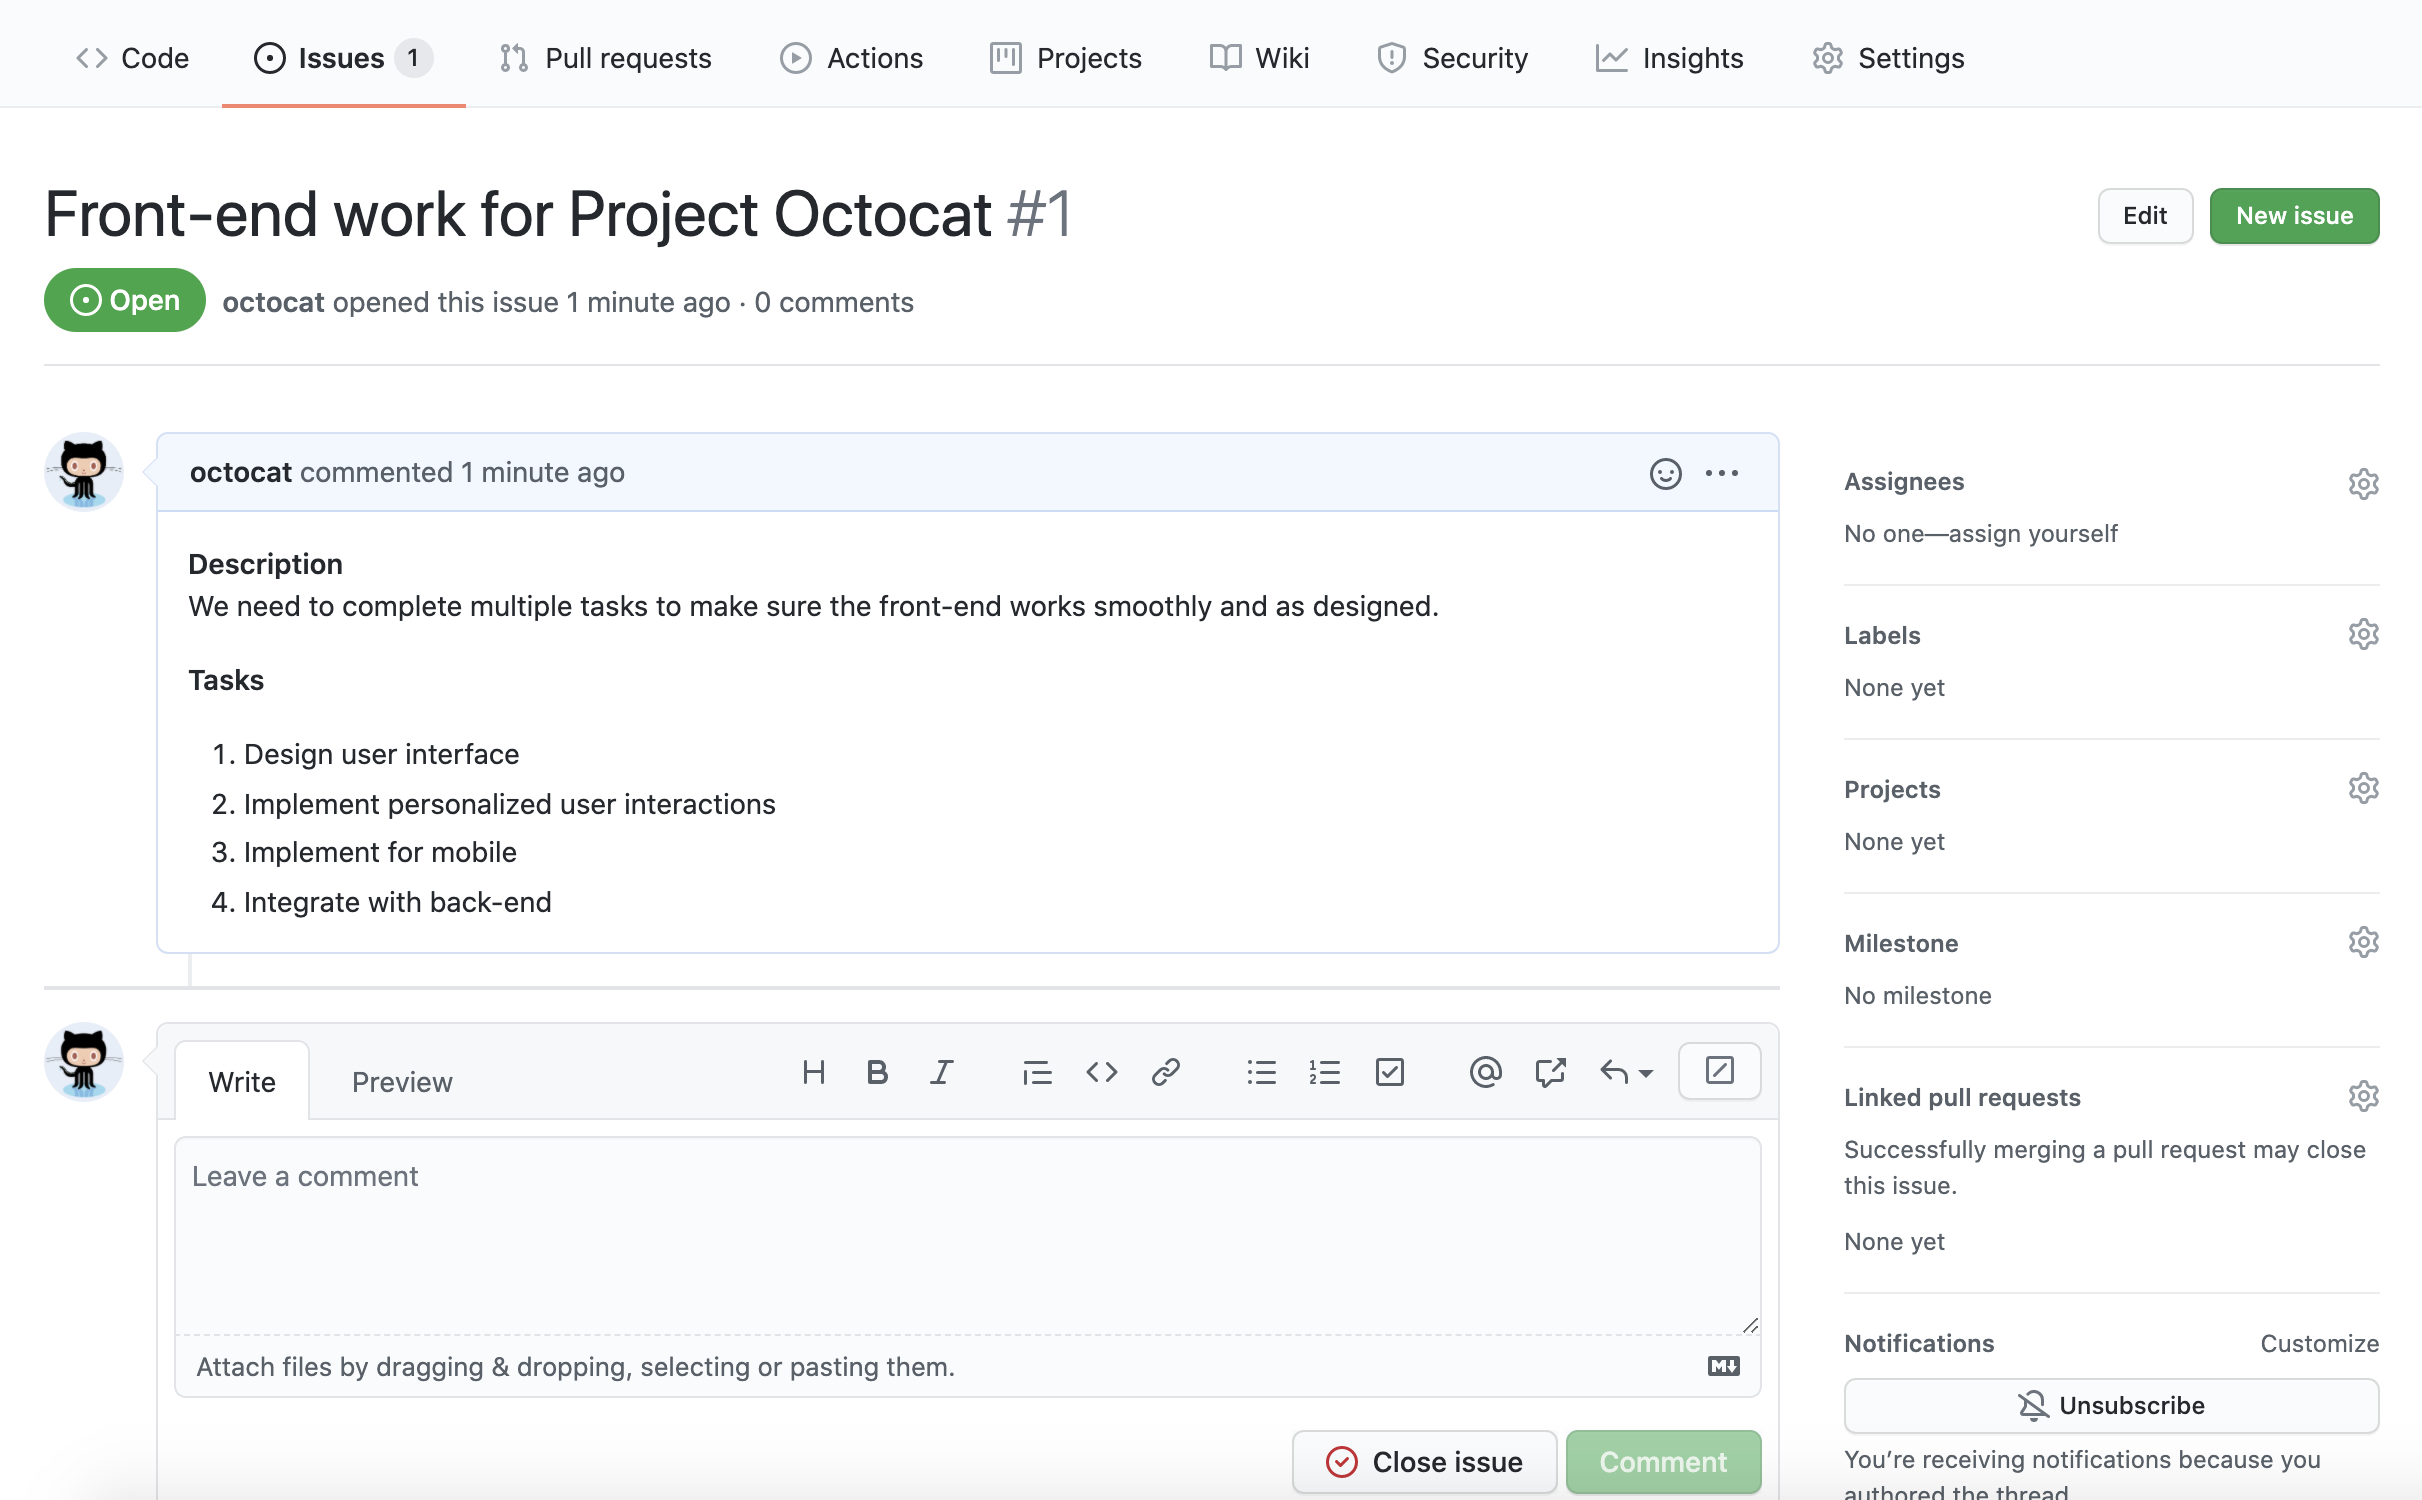 Screenshot of an issue called "Front-end work for Project Octocat." The issue body includes a list of tasks to complete.